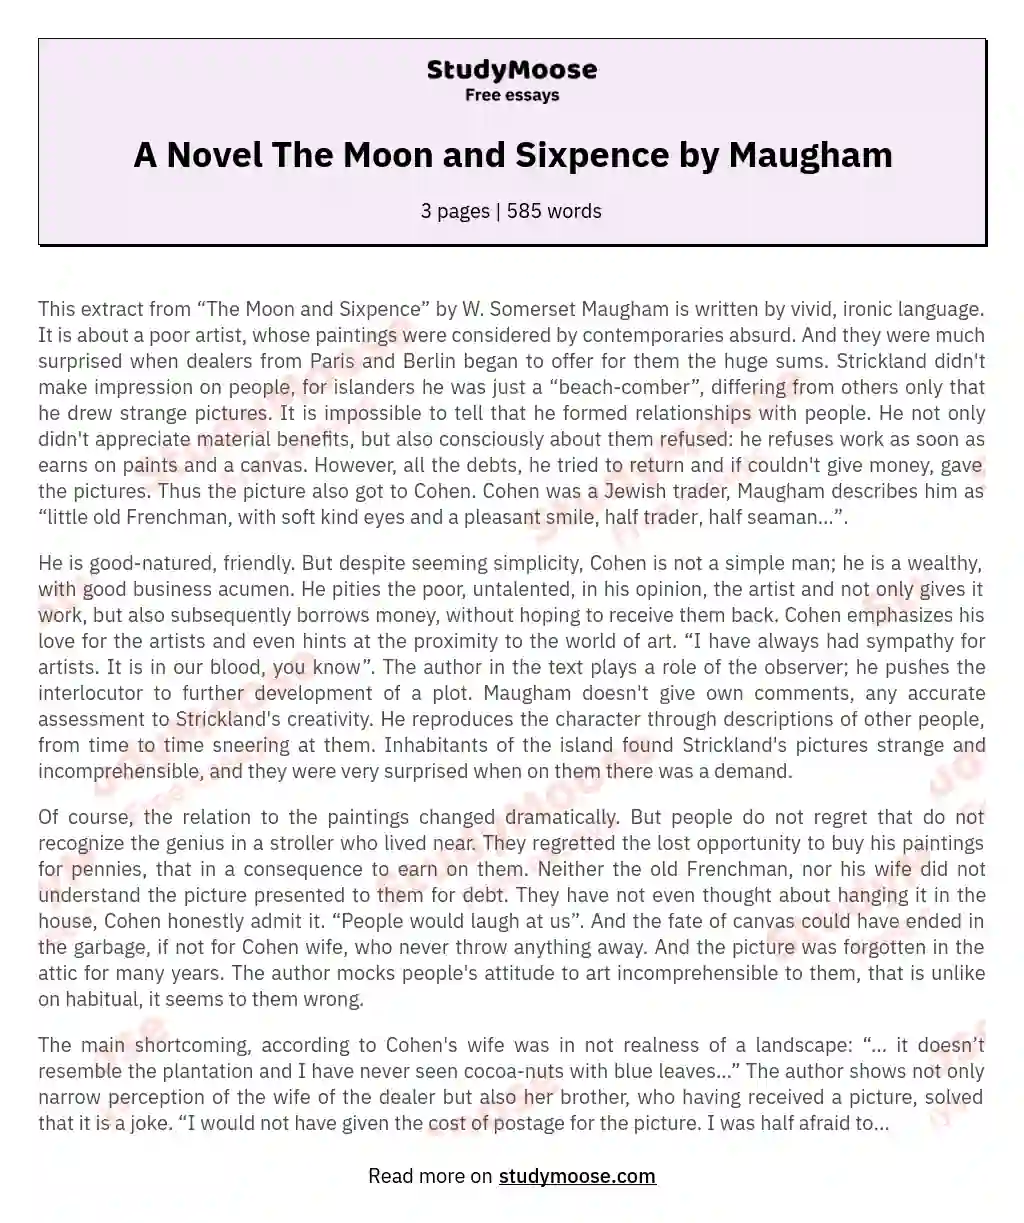 A Novel The Moon and Sixpence by Maugham